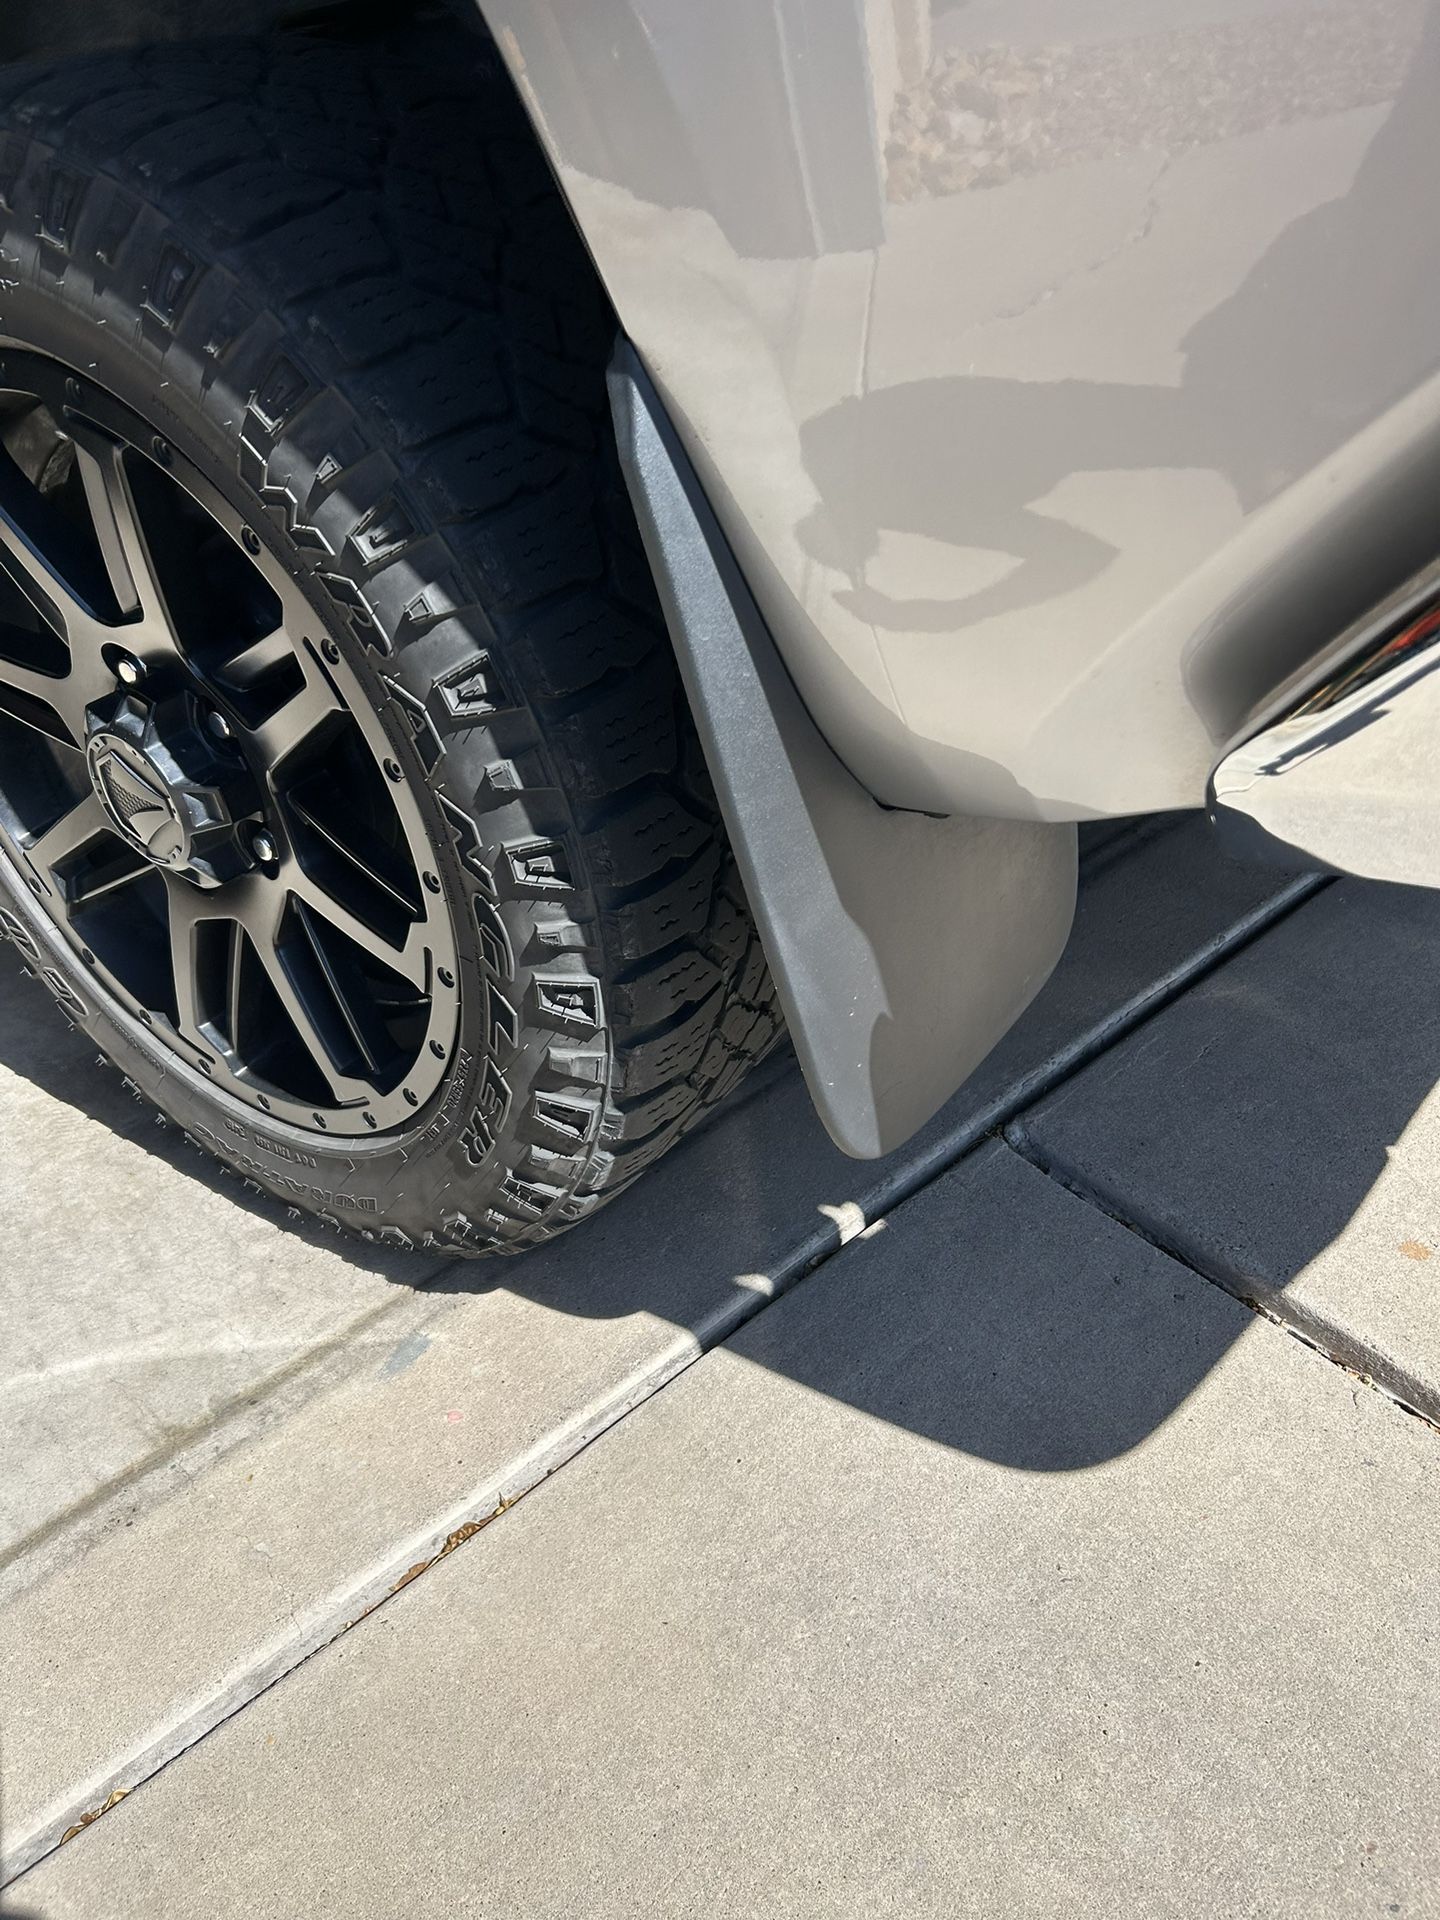 Mud Guards For A 2020 Tundra